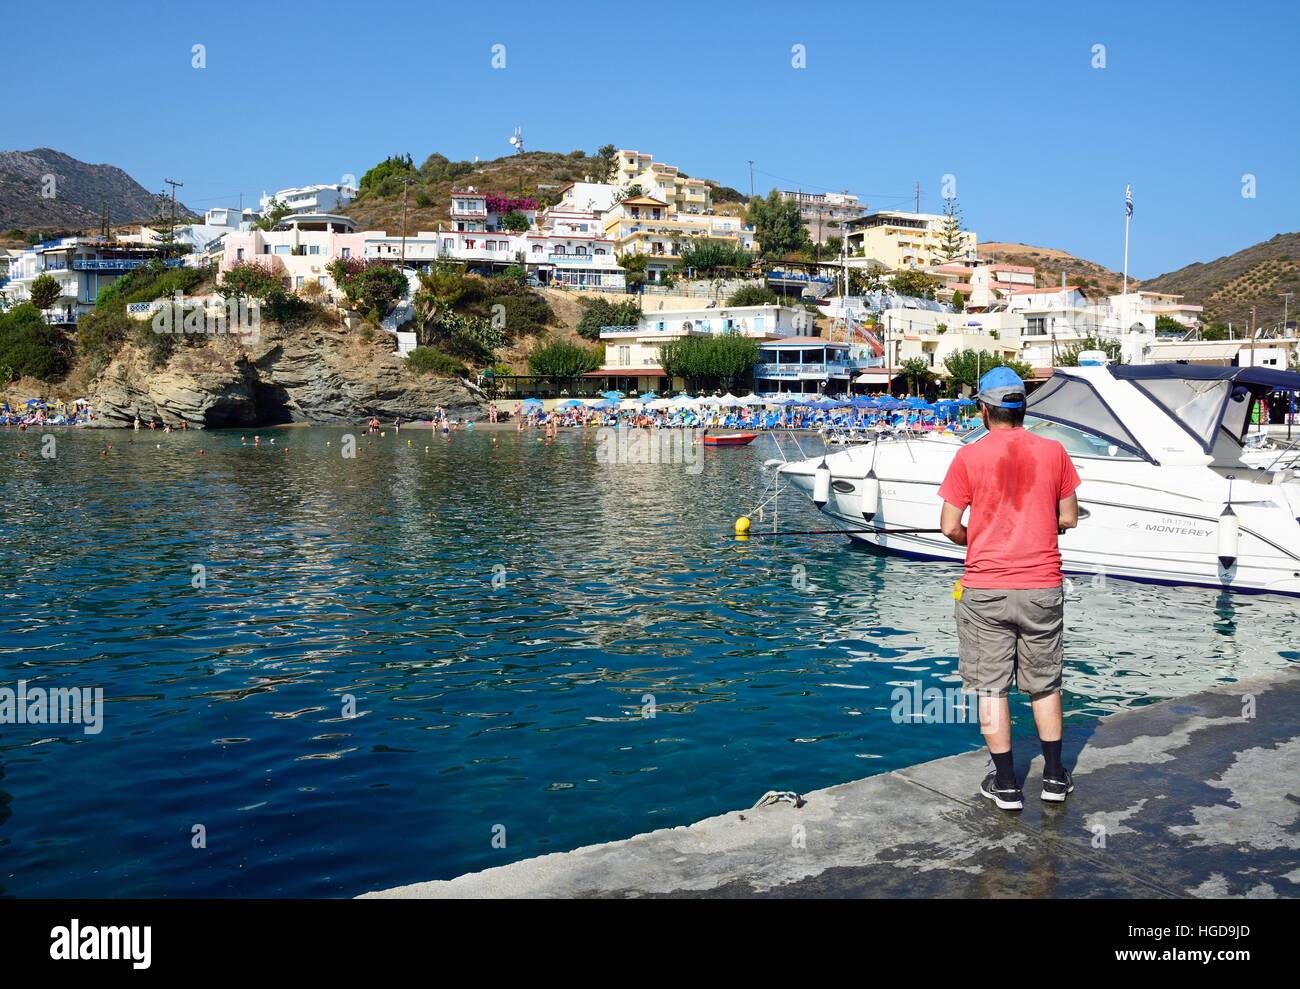 Man wishing from the harbour wall with tourists relaxing on the beach to the rear, Bali, Crete, Greece, Europe. Stock Photo